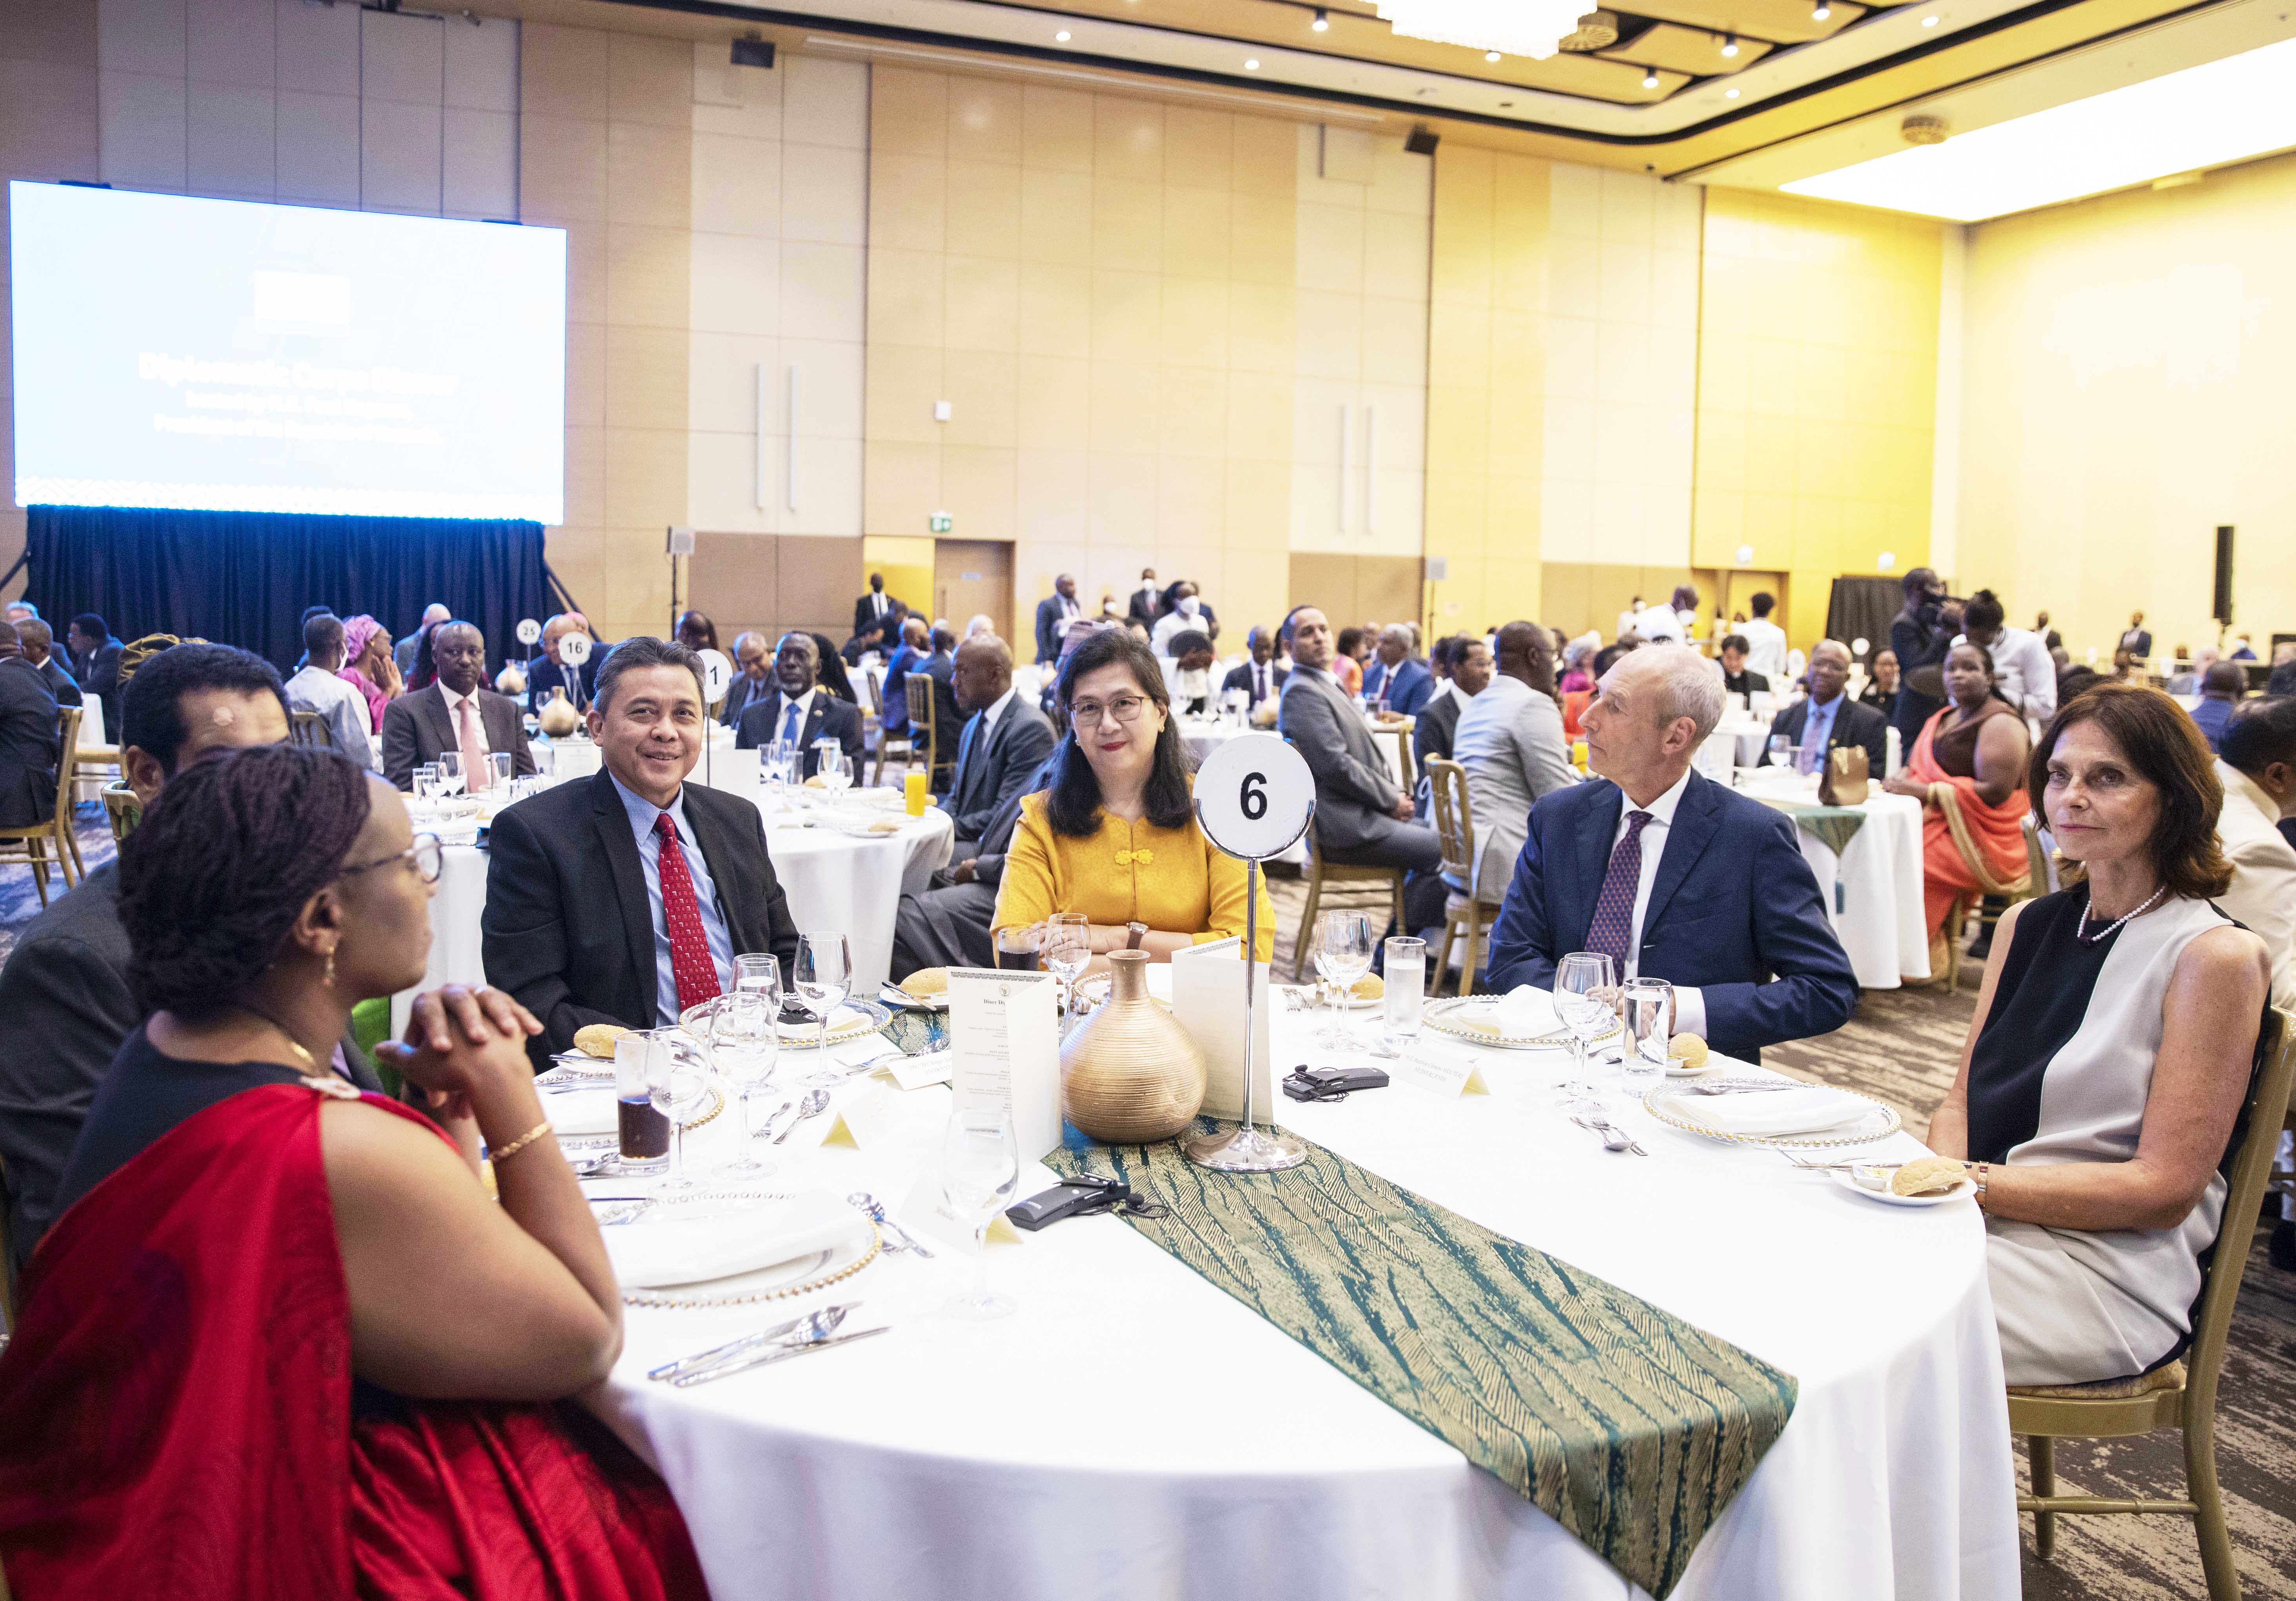 Members of the diplomatic corps follow President Kagame 's remarks during a dinner event on April 26. Photo by Village Urugwiro.